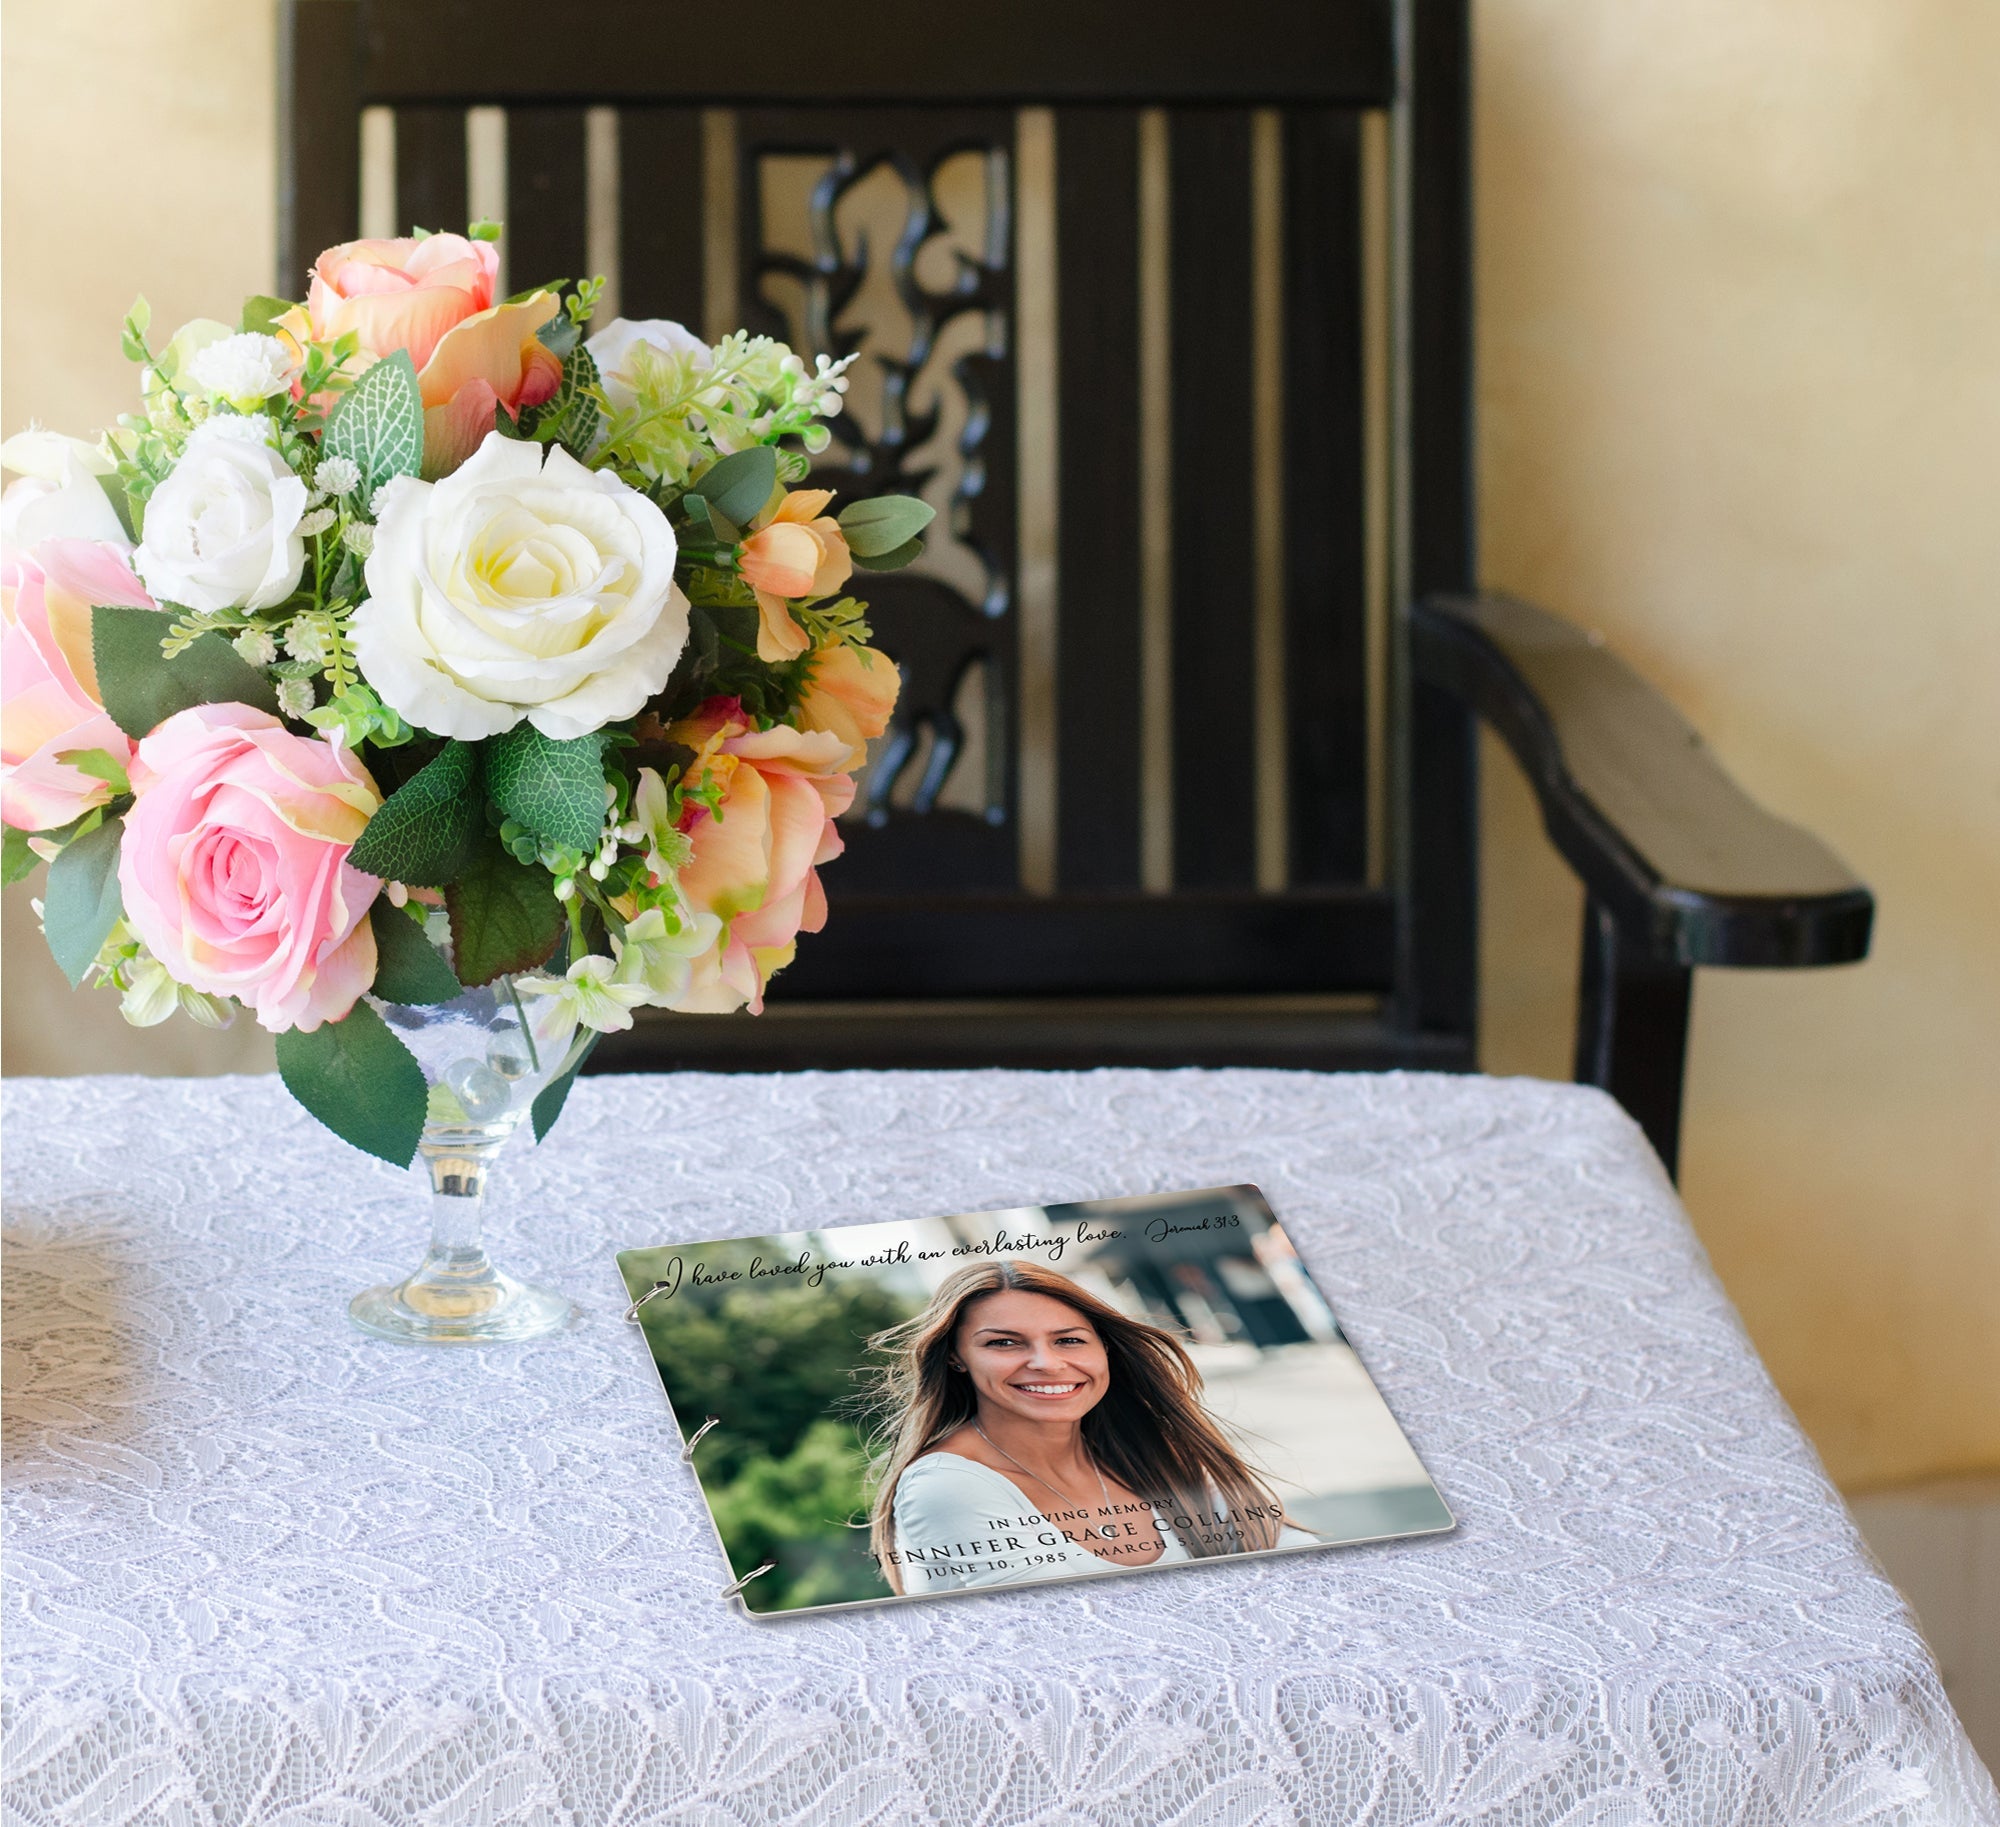 Personalized Funeral Service Guest Book 8.5x11 Everlasting Love (Full color portrait) - LifeSong Milestones